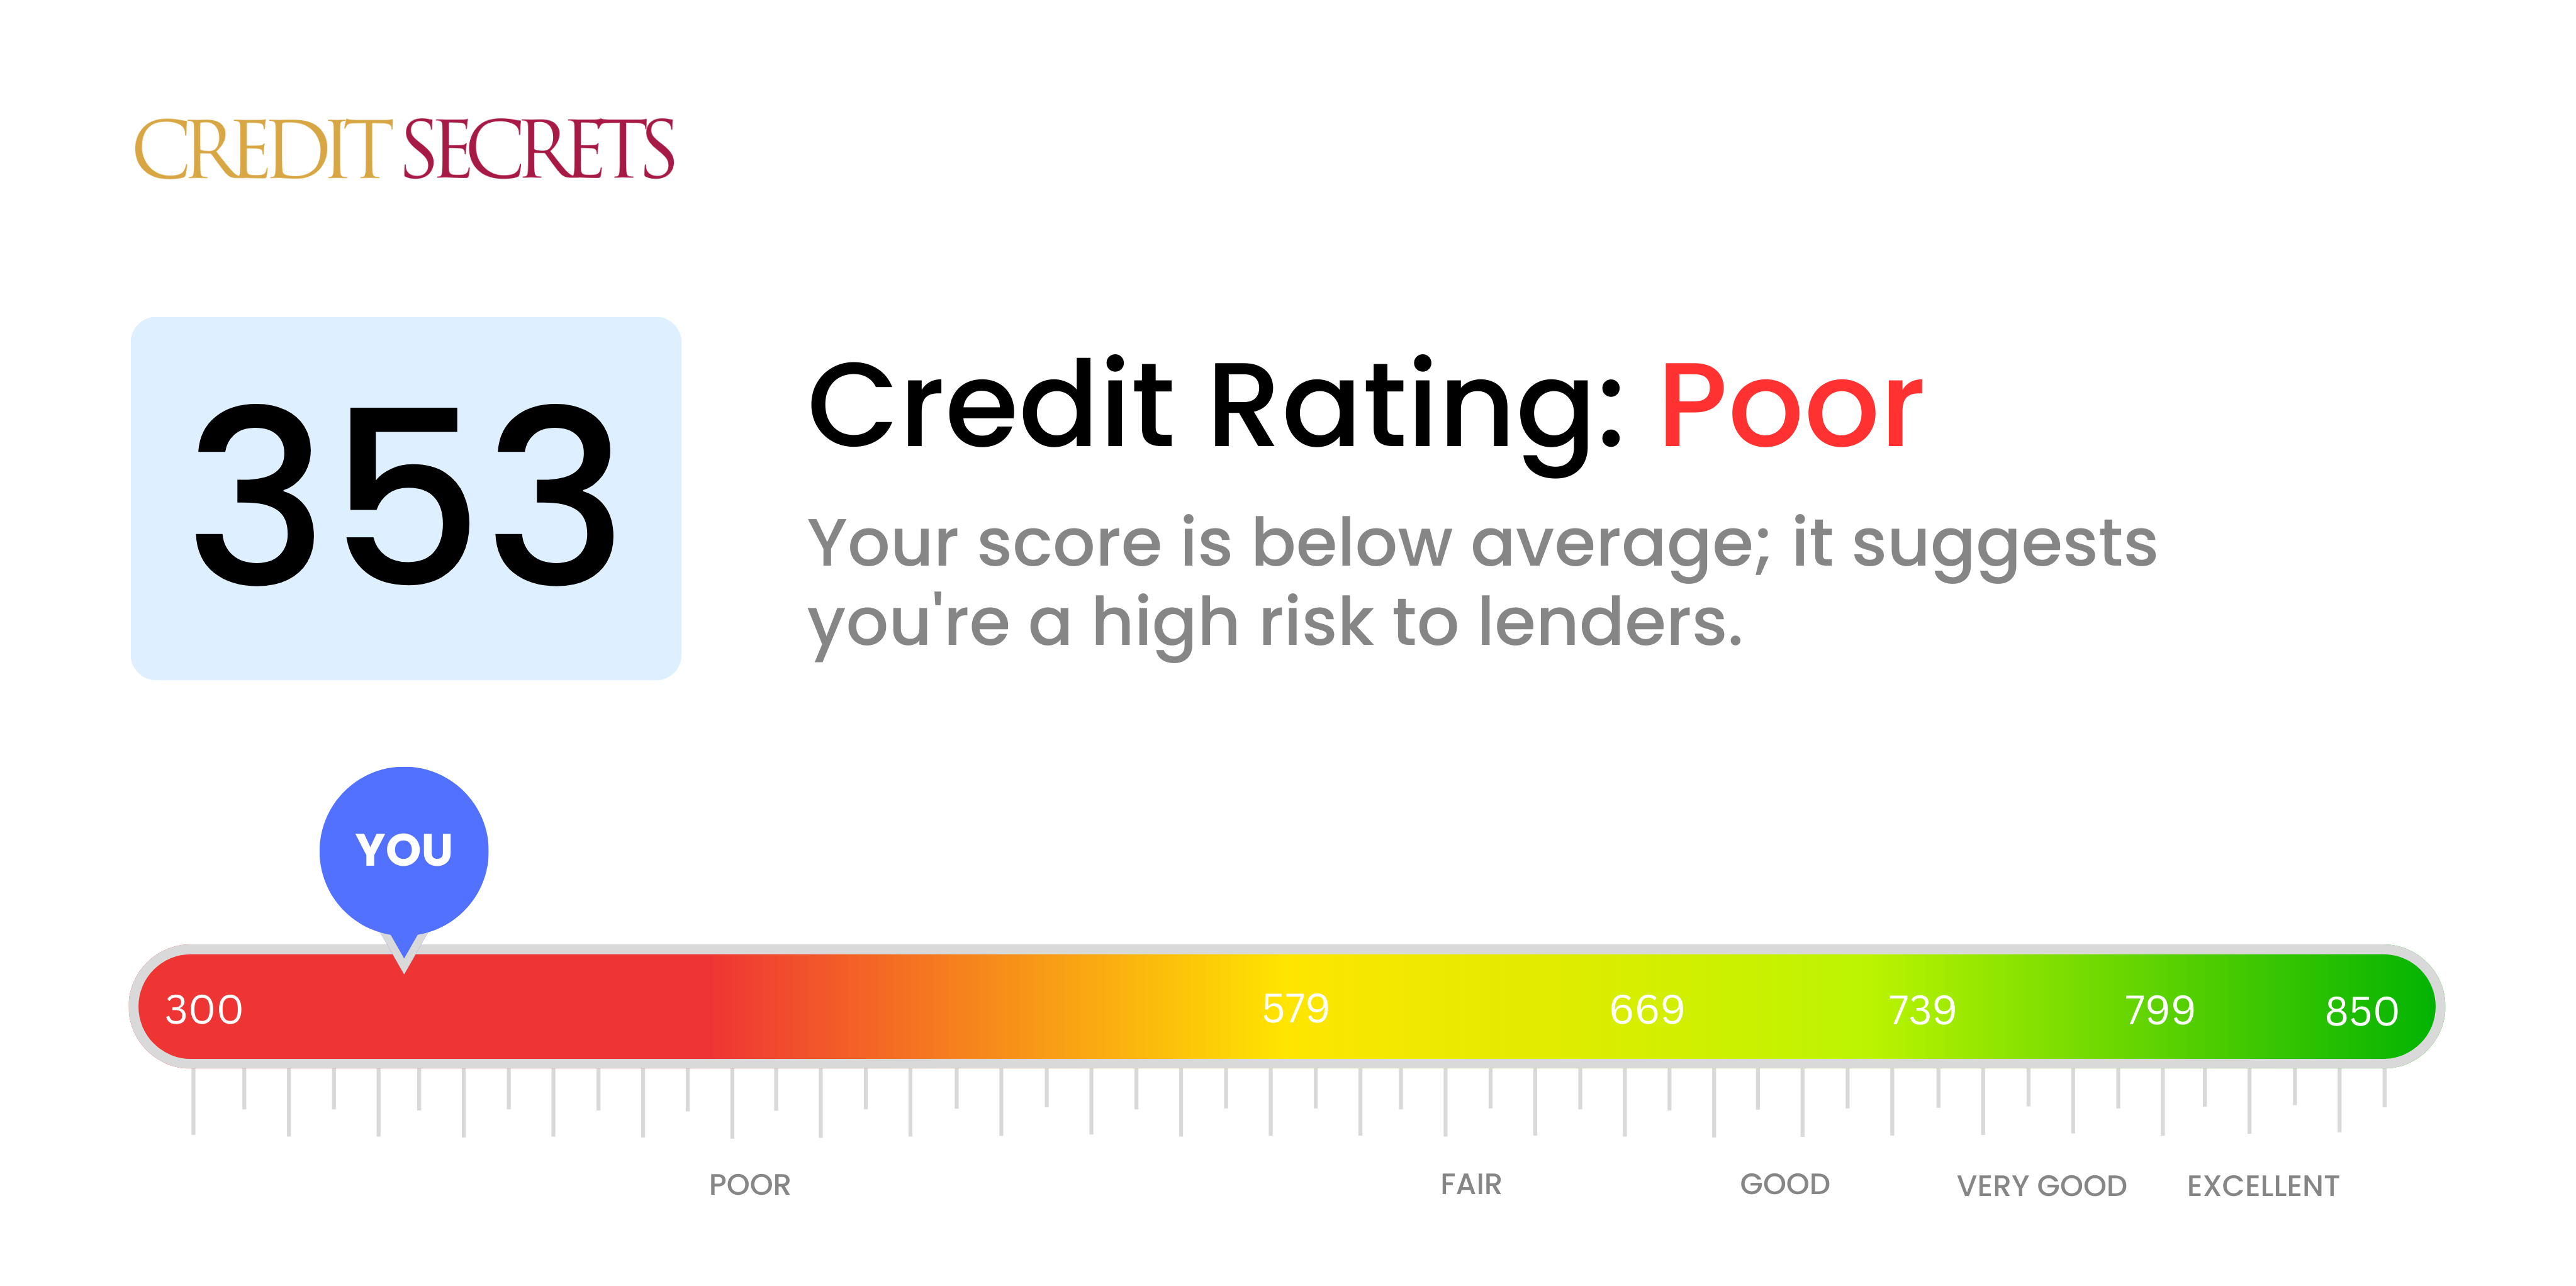 Is 353 a good credit score?